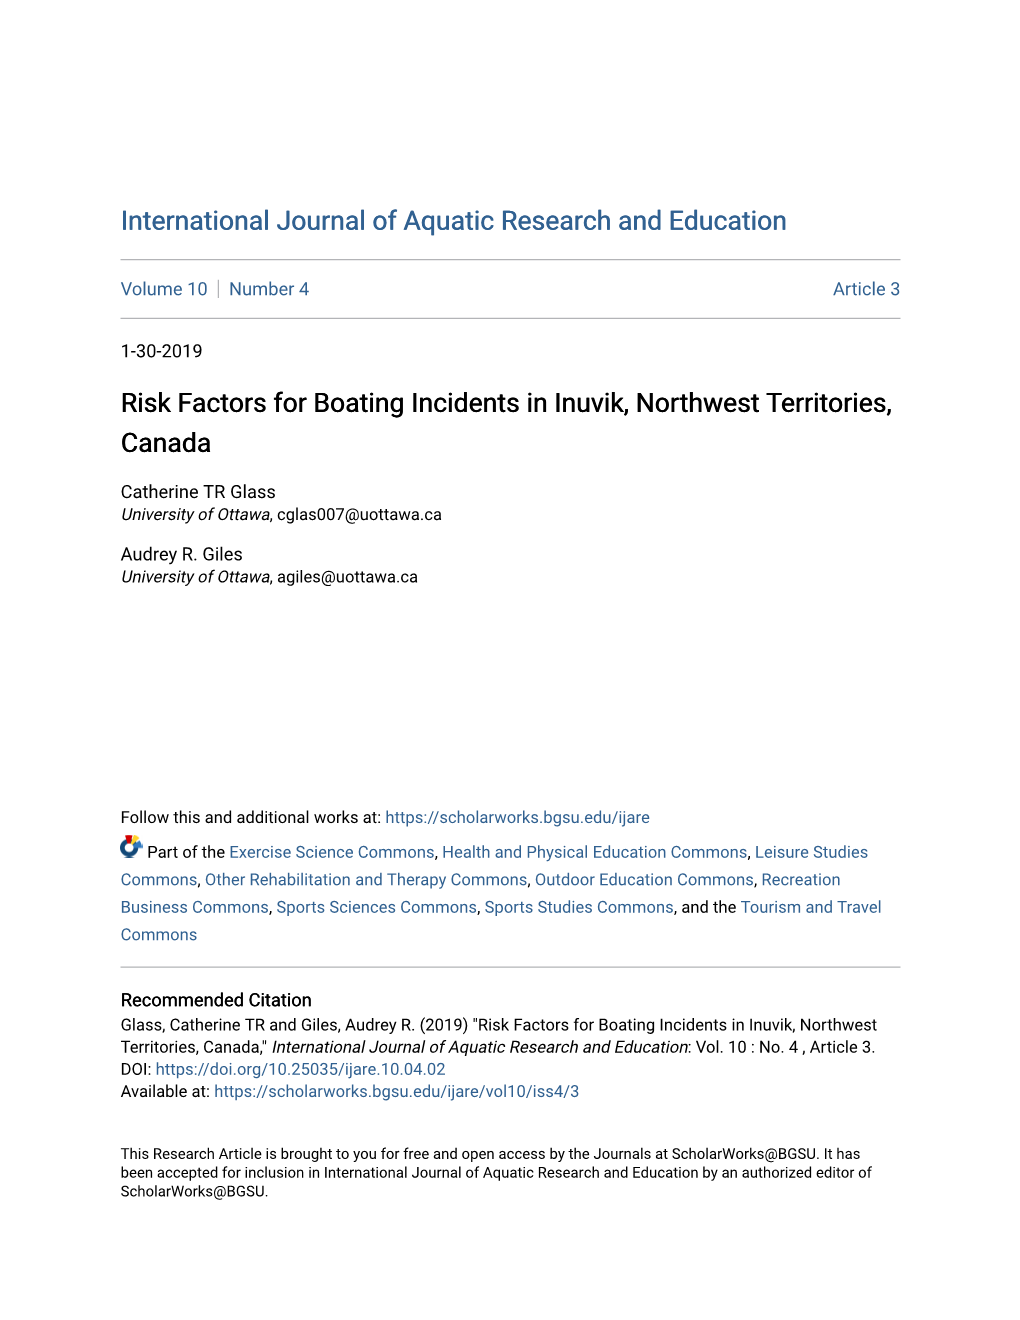 Risk Factors for Boating Incidents in Inuvik, Northwest Territories, Canada